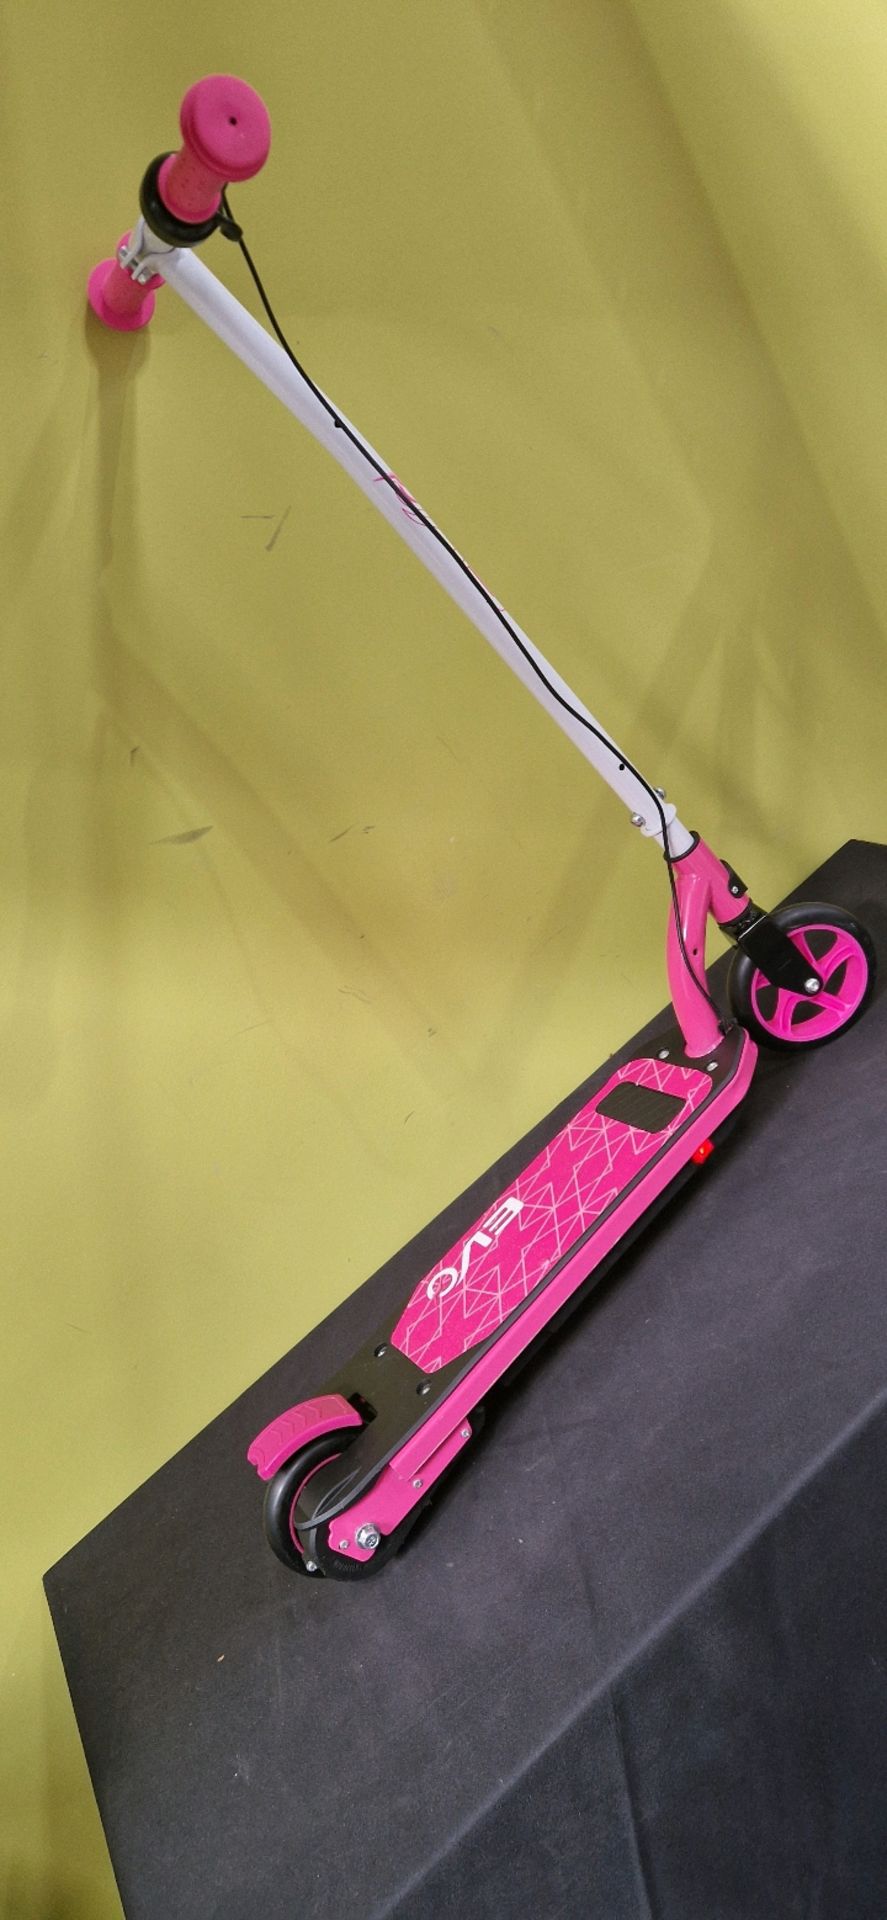 EVO ELECTRIC SCOOTER PINK